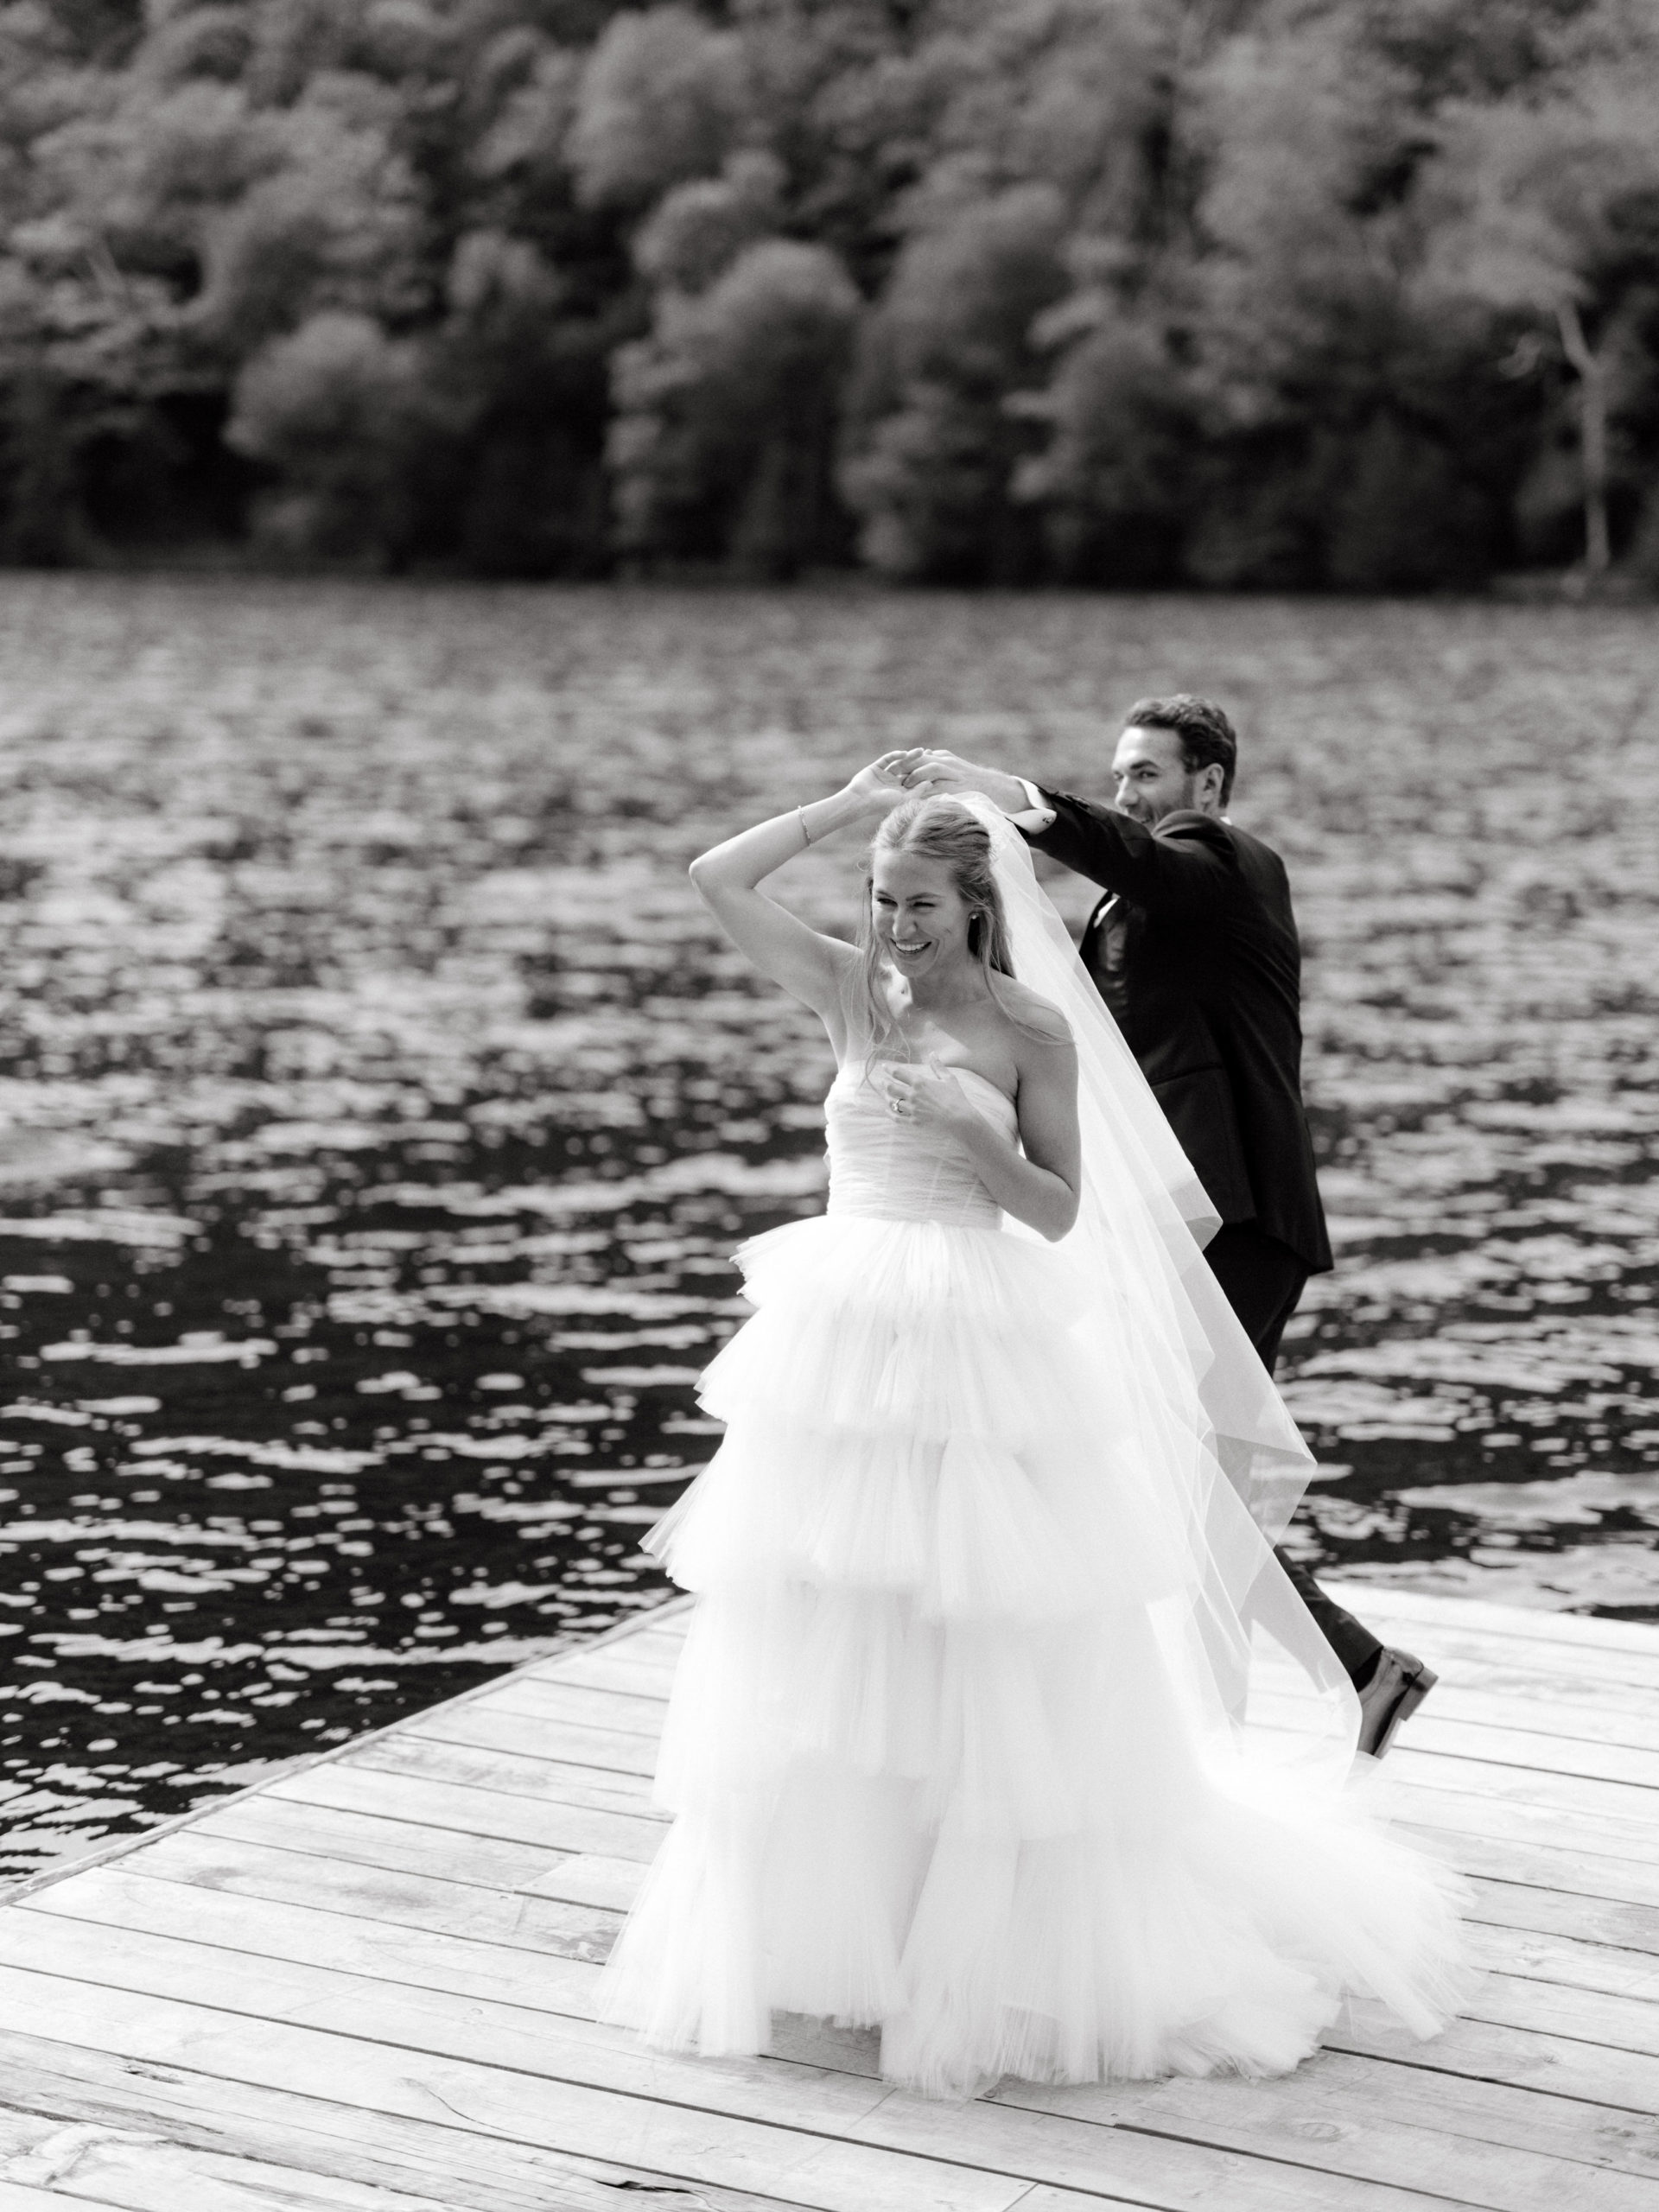 Editorial photo of the bride and groom dancing in the dock with the lake in the background at The Ausable Club. Upstate NY wedding venues image by Jenny Fu Studio